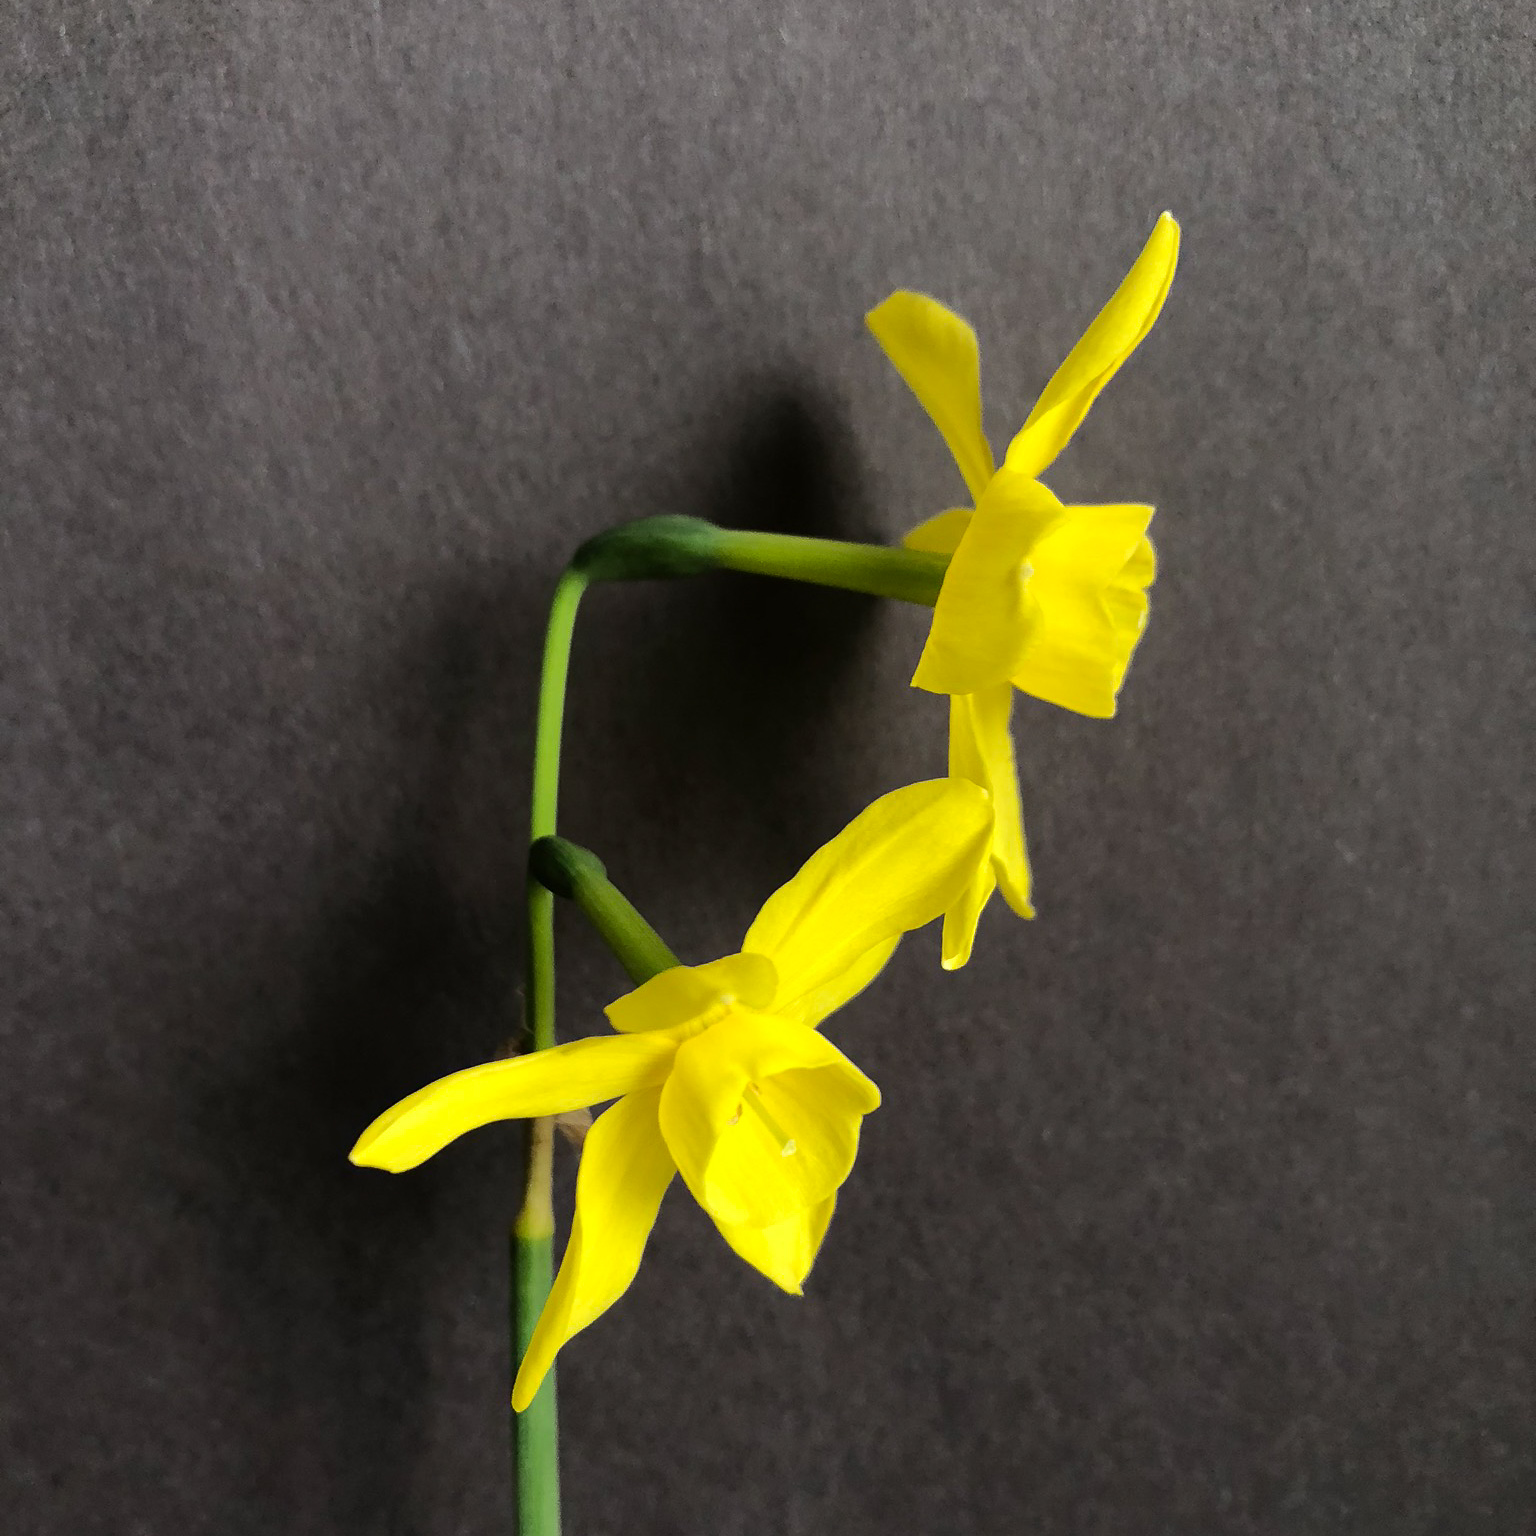 two narcissus sunlight sensation flowers on a single stem both facing to the right side